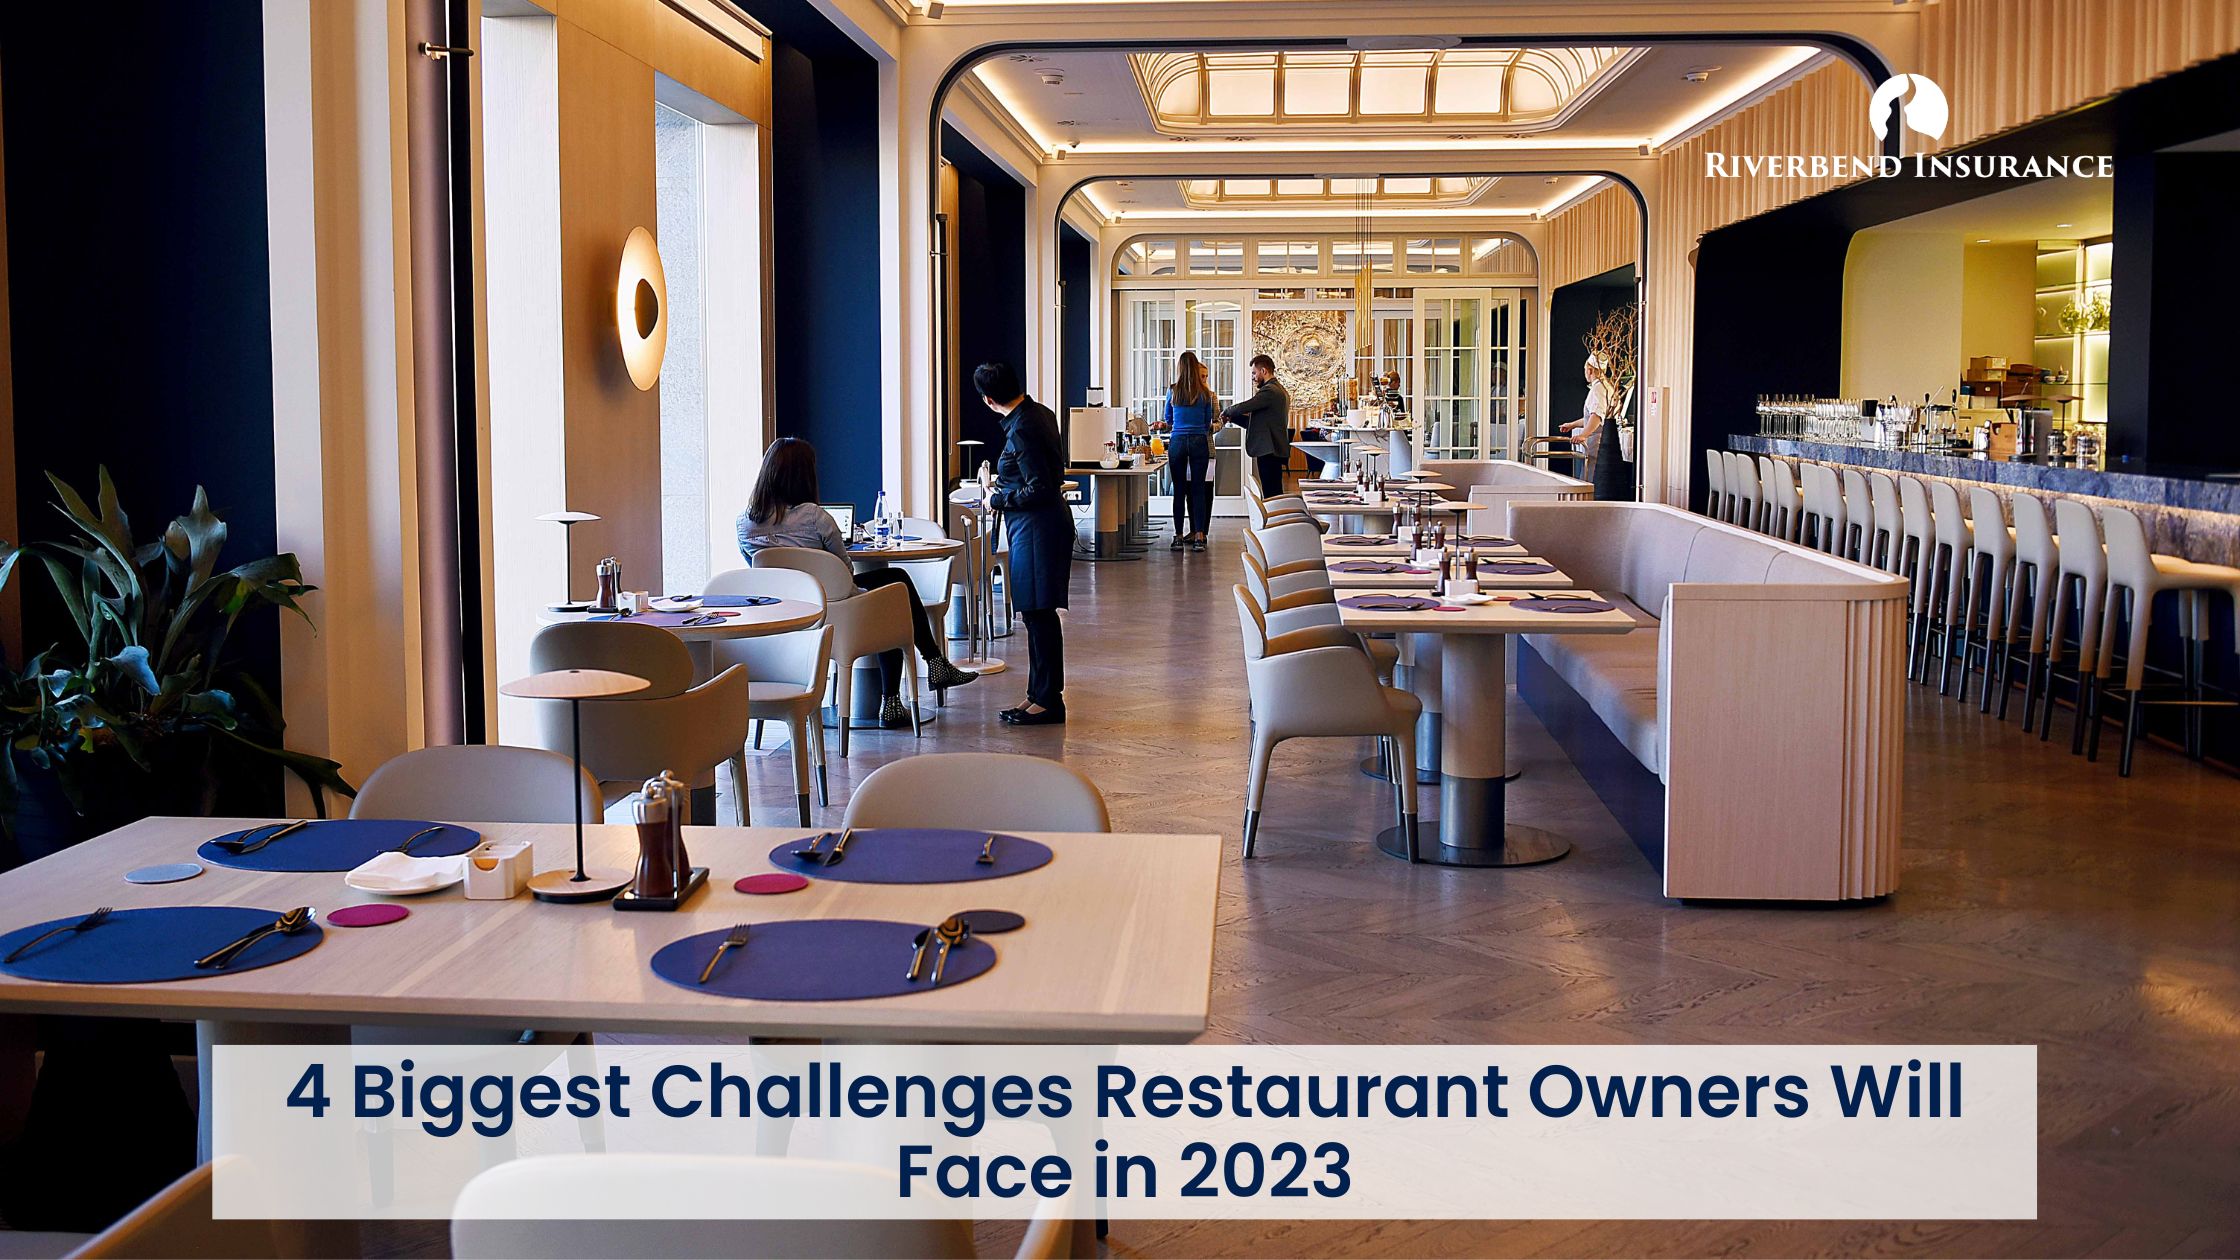 4 Biggest Challenges Restaurant Owners Will Face in 2023